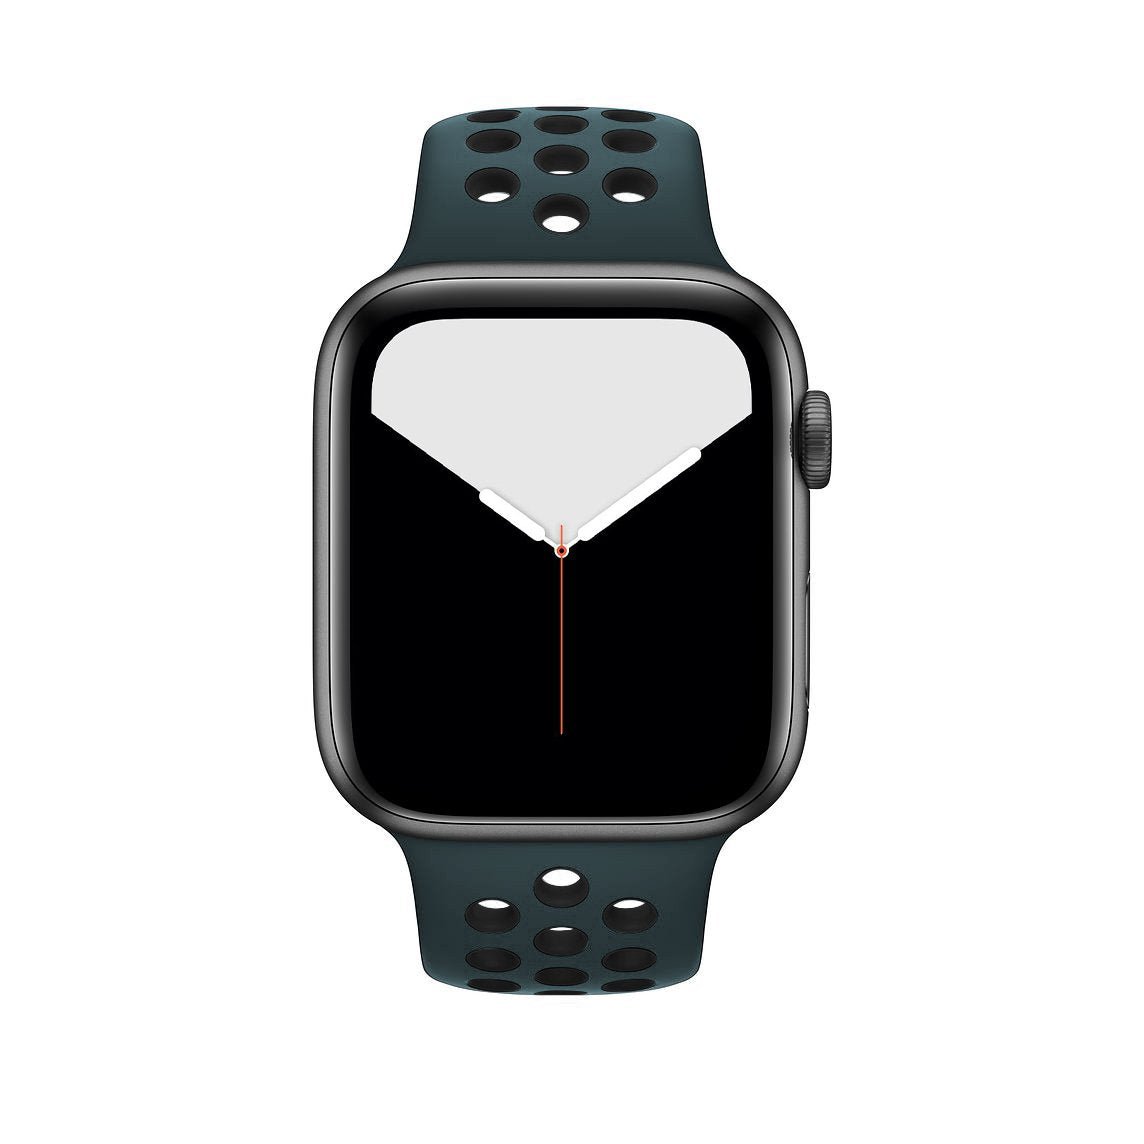 Celestial Teal/Black Silicone Sport Strap for Apple Watch Silicone Bands   Accessories Gifts UK